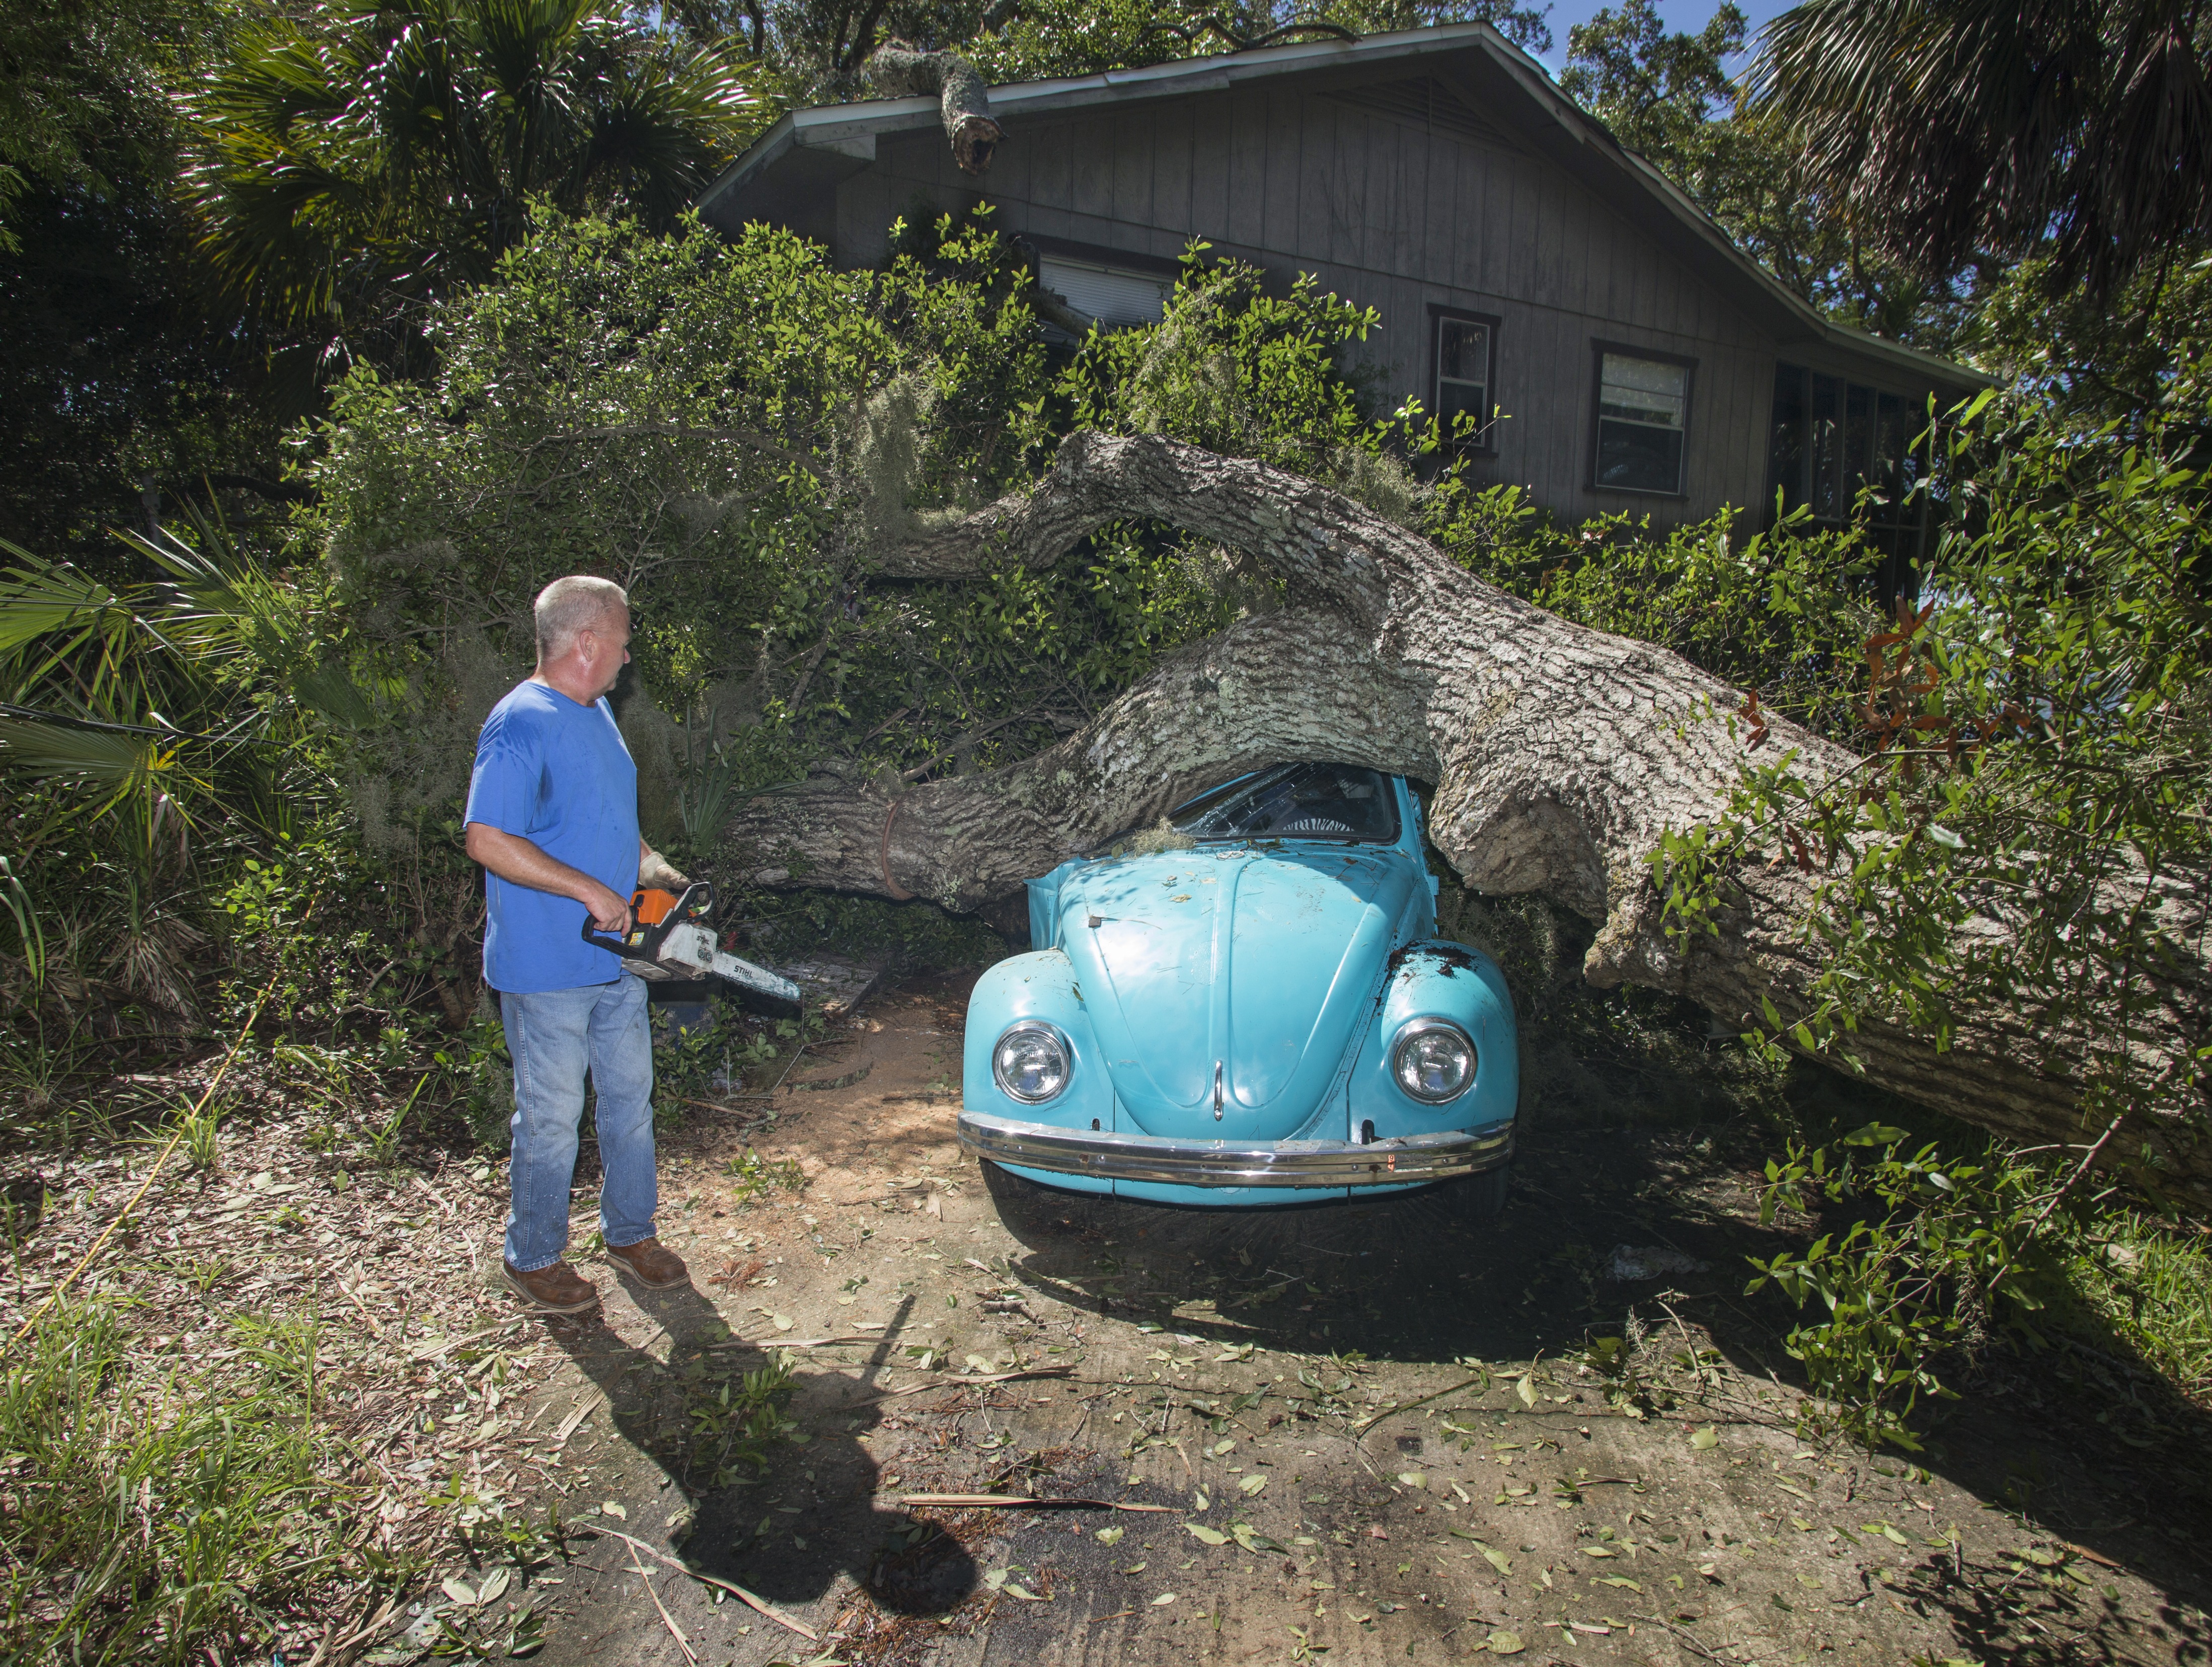 ALLIGATOR POINT, FL - SEPTEMBER 02: Tom Reams looks over a tree on top of his 15 year old daughter's Volkswagen Beetle and house cause by the wind and storm surge from Hurricane Hermine at Alligator Point, Florida September 2, 2016. Hermine made landfall as a Category 1 hurricane but has weakened back to a tropical storm. 